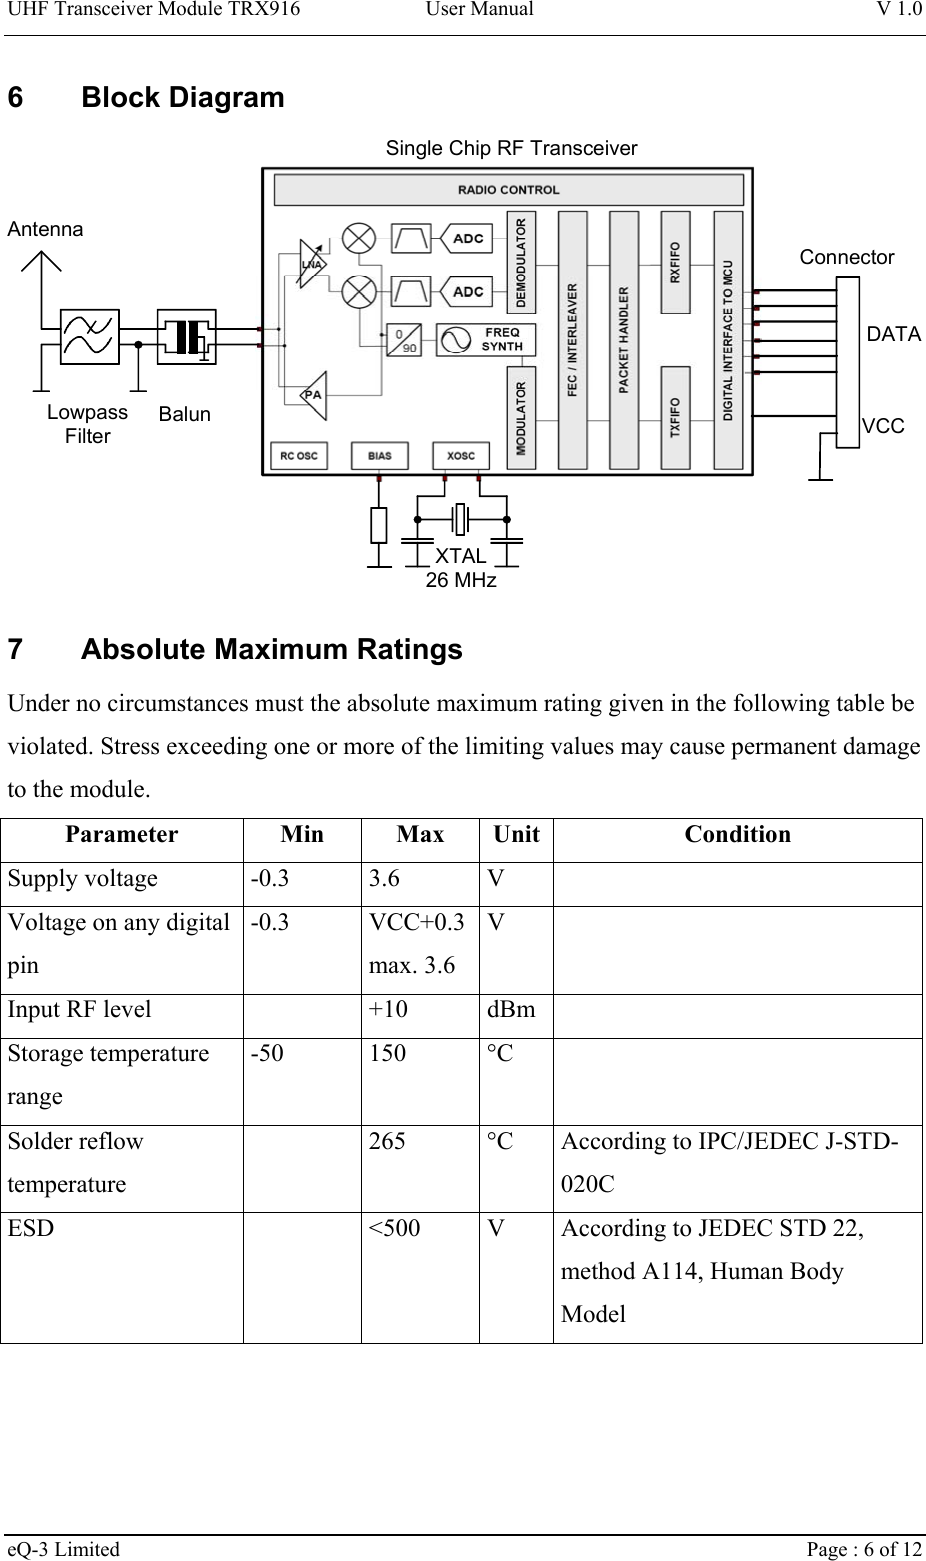 UHF Transceiver Module TRX916 User Manual  V 1.0 eQ-3 Limited    Page : 6 of 12 6 Block Diagram Single Chip RF TransceiverXTAL26 MHzBalunLowpassFilterAntennaVCCDATAConnector 7  Absolute Maximum Ratings Under no circumstances must the absolute maximum rating given in the following table be violated. Stress exceeding one or more of the limiting values may cause permanent damage to the module. Parameter Min Max Unit  Condition Supply voltage  -0.3  3.6  V   Voltage on any digital pin -0.3 VCC+0.3 max. 3.6  V  Input RF level    +10  dBm   Storage temperature range -50 150 °C  Solder reflow temperature   265  °C  According to IPC/JEDEC J-STD-020C ESD    &lt;500  V  According to JEDEC STD 22, method A114, Human Body Model 